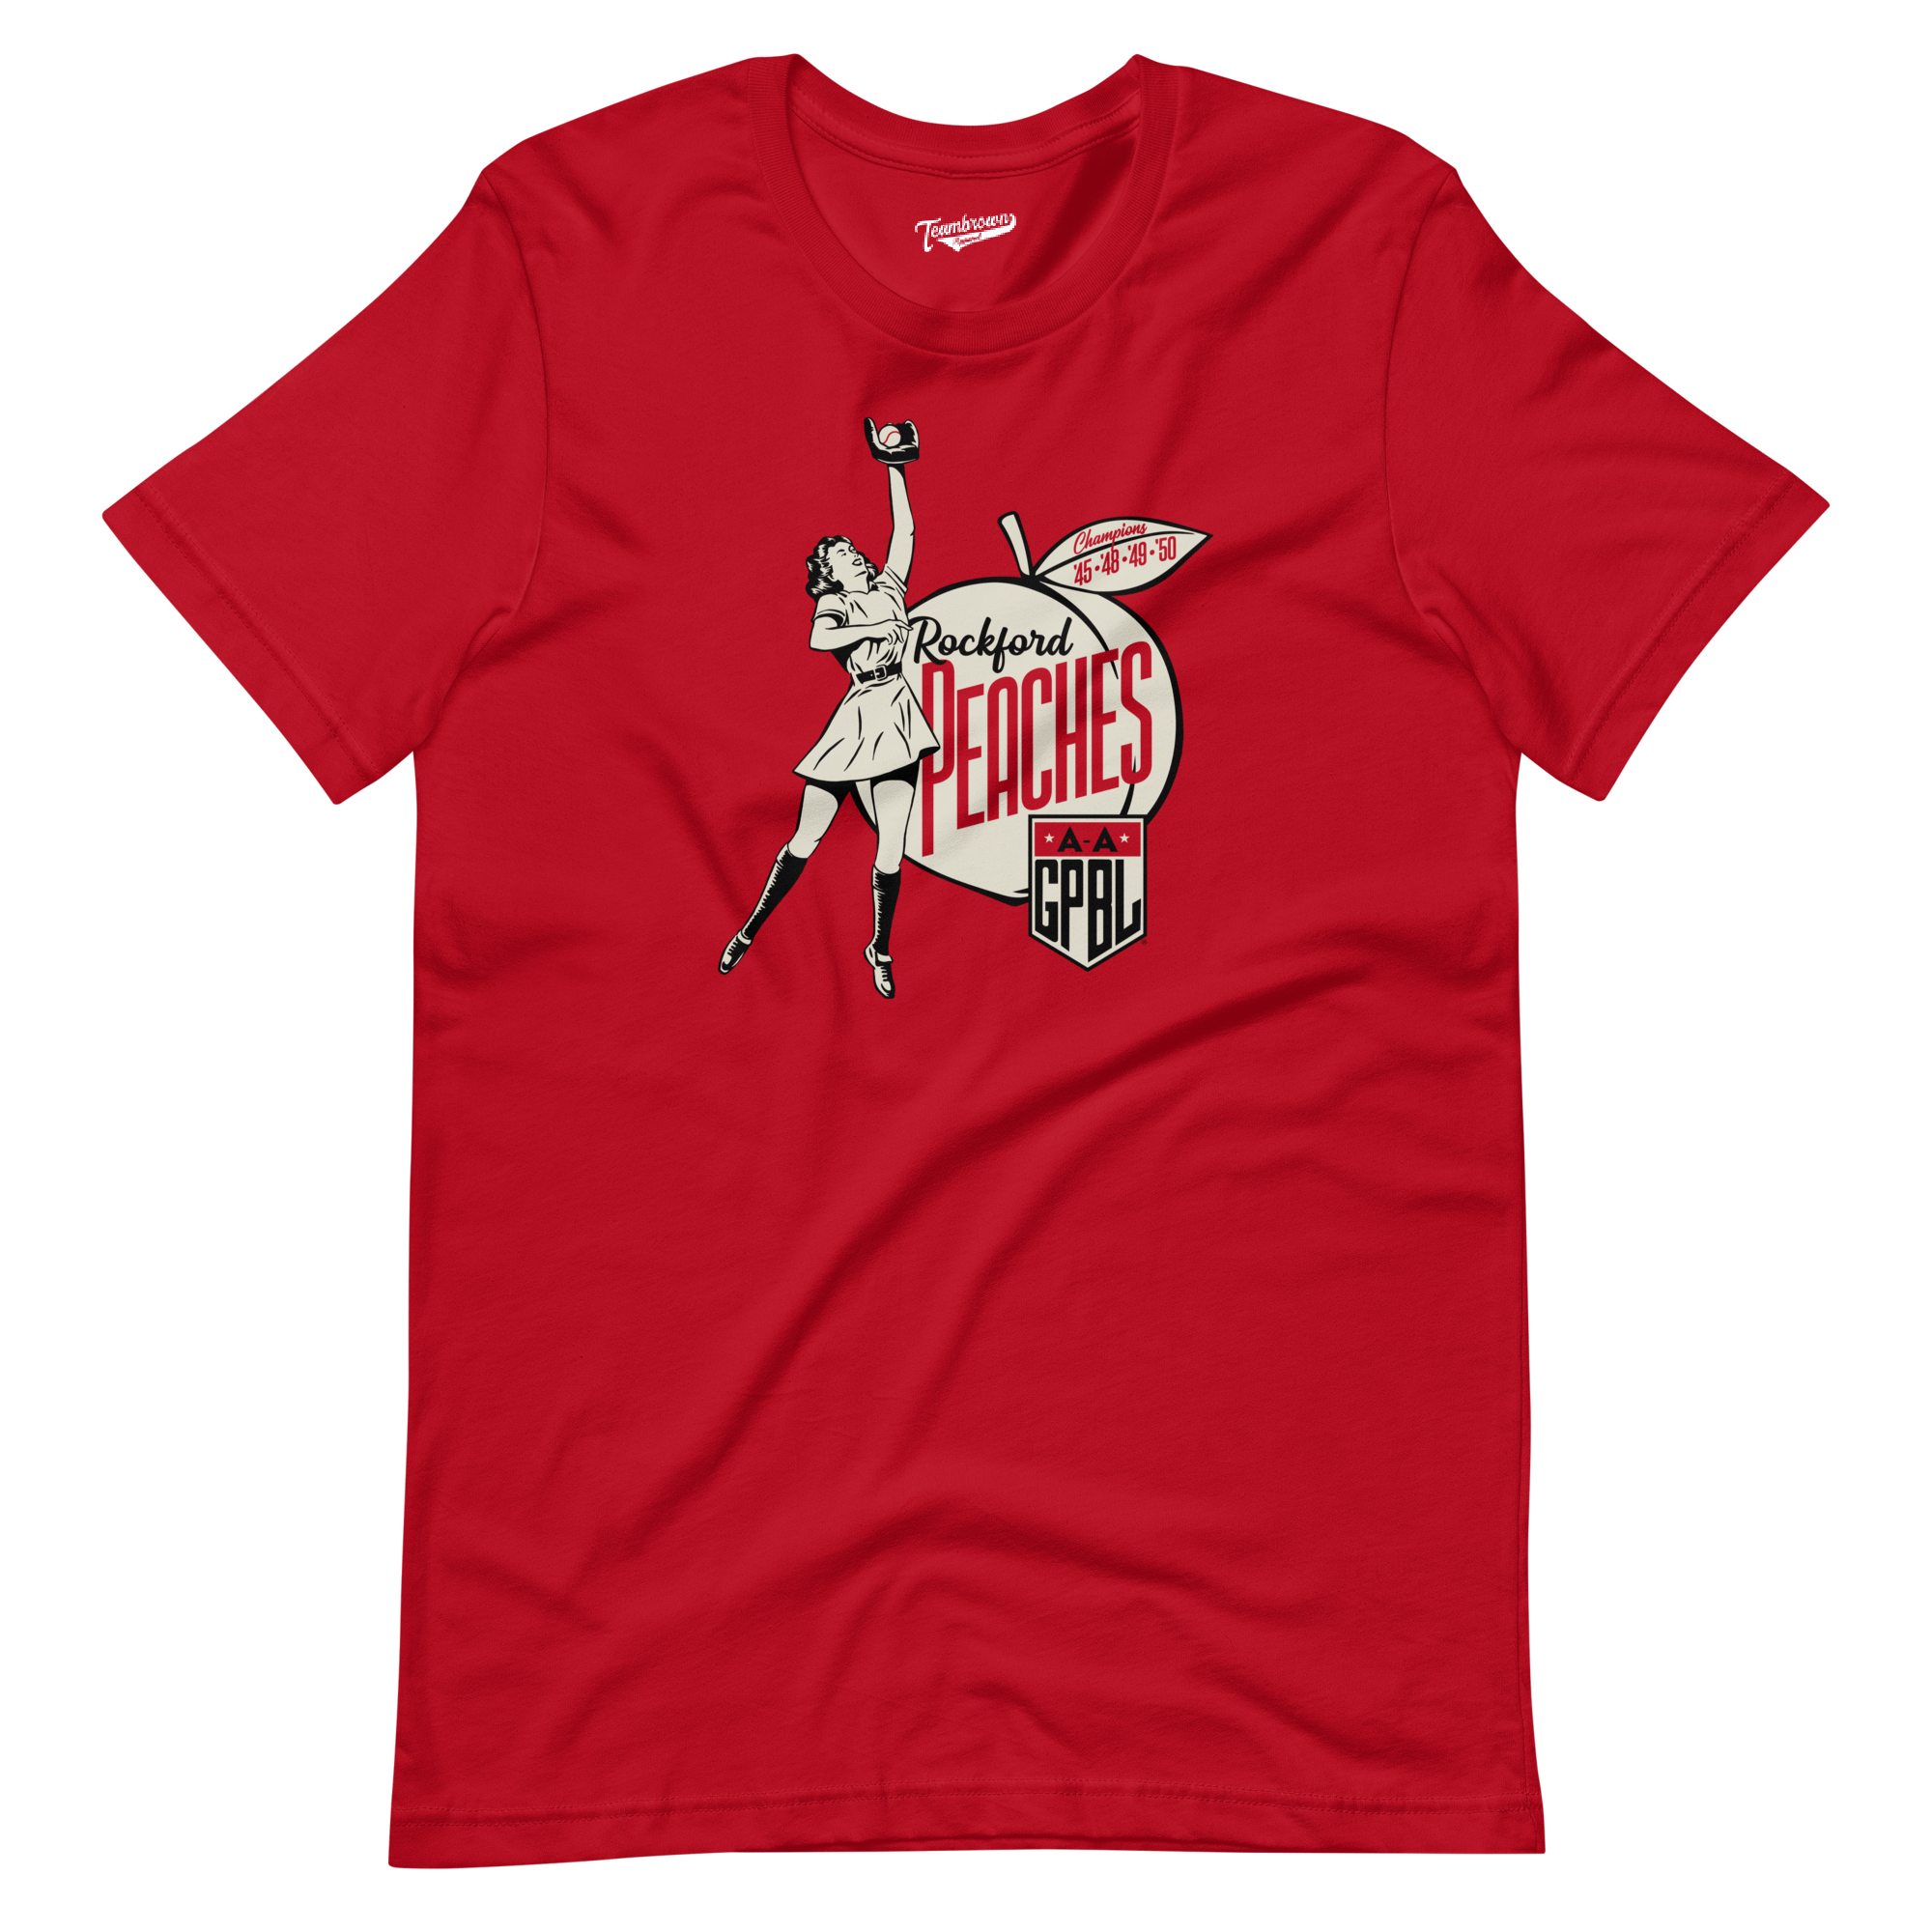 Small Town Louisville Christmas Vintage T-Shirt